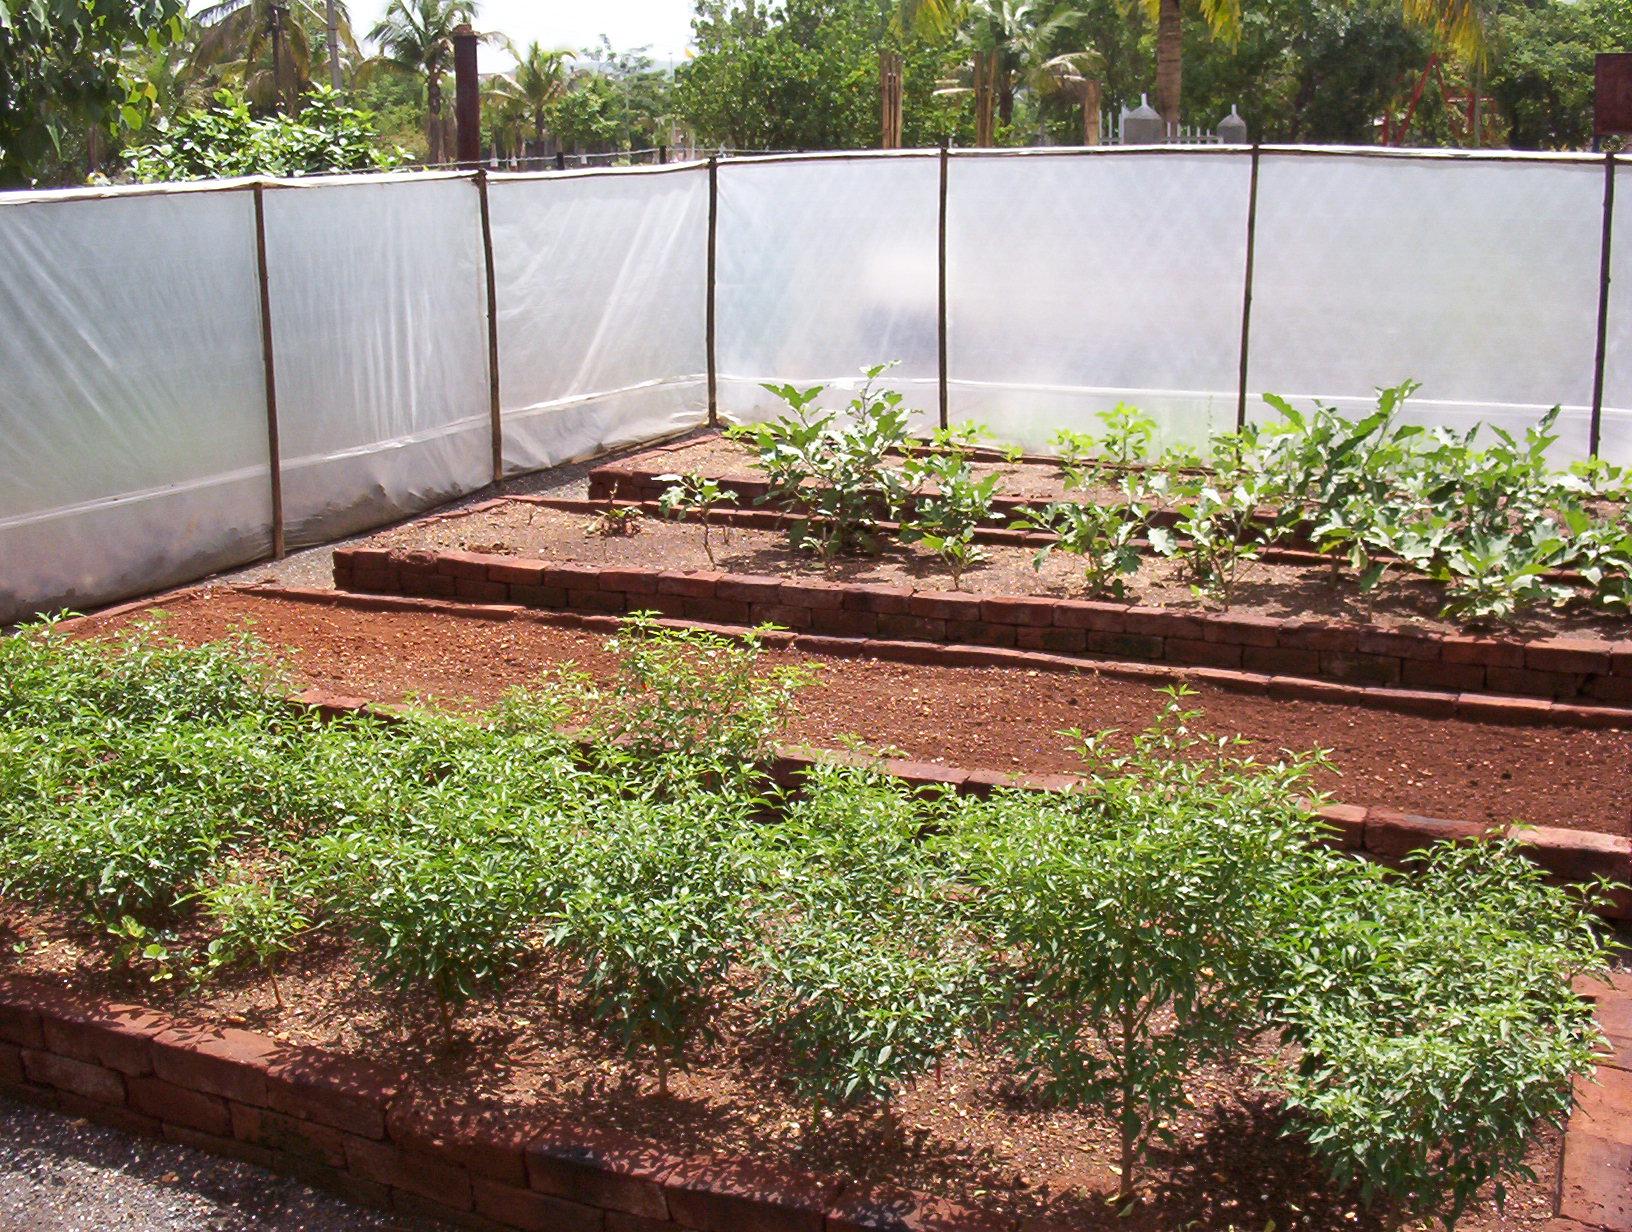 Farming on permanent raised beds 